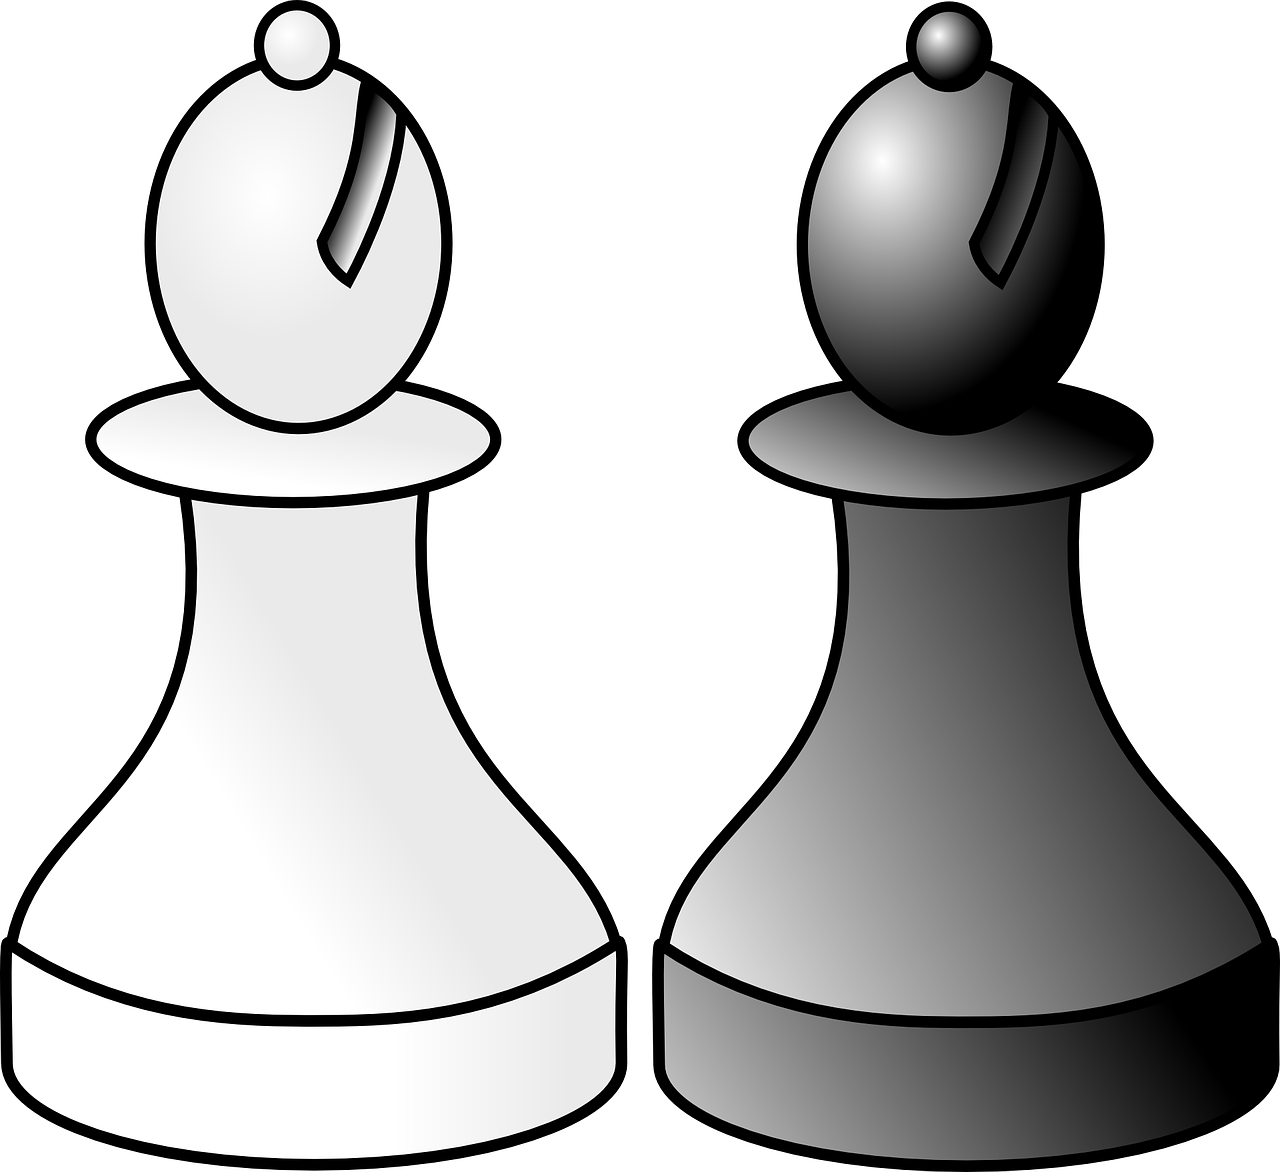 Sketch of a pawn chess piece Royalty Free Vector Image